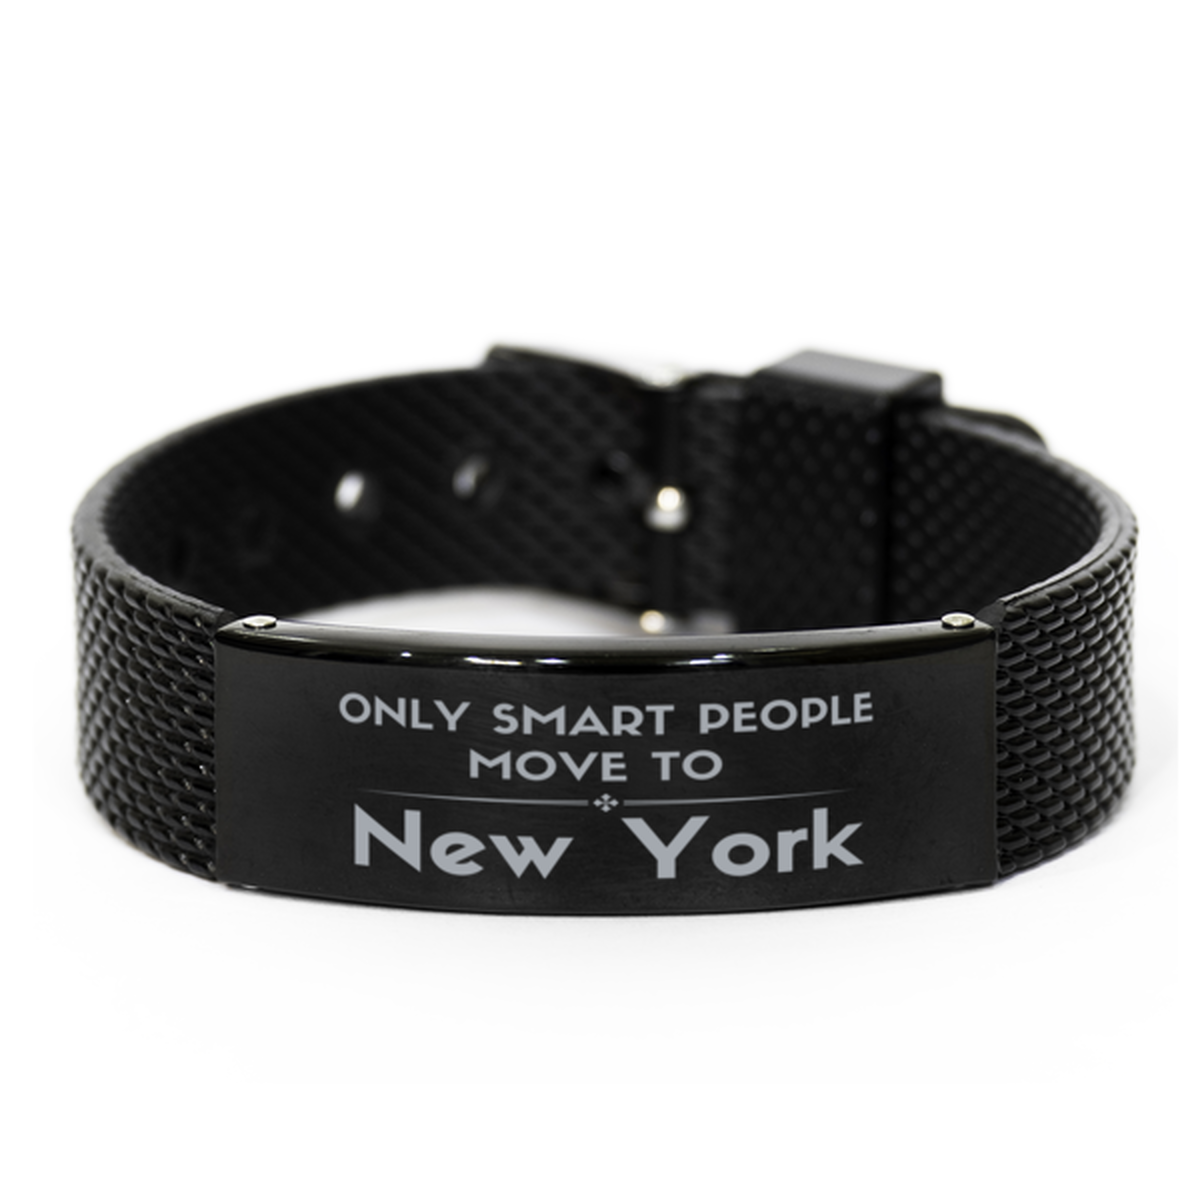 Only smart people move to New York Black Shark Mesh Bracelet, Gag Gifts For New York, Move to New York Gifts for Friends Coworker Funny Saying Quote